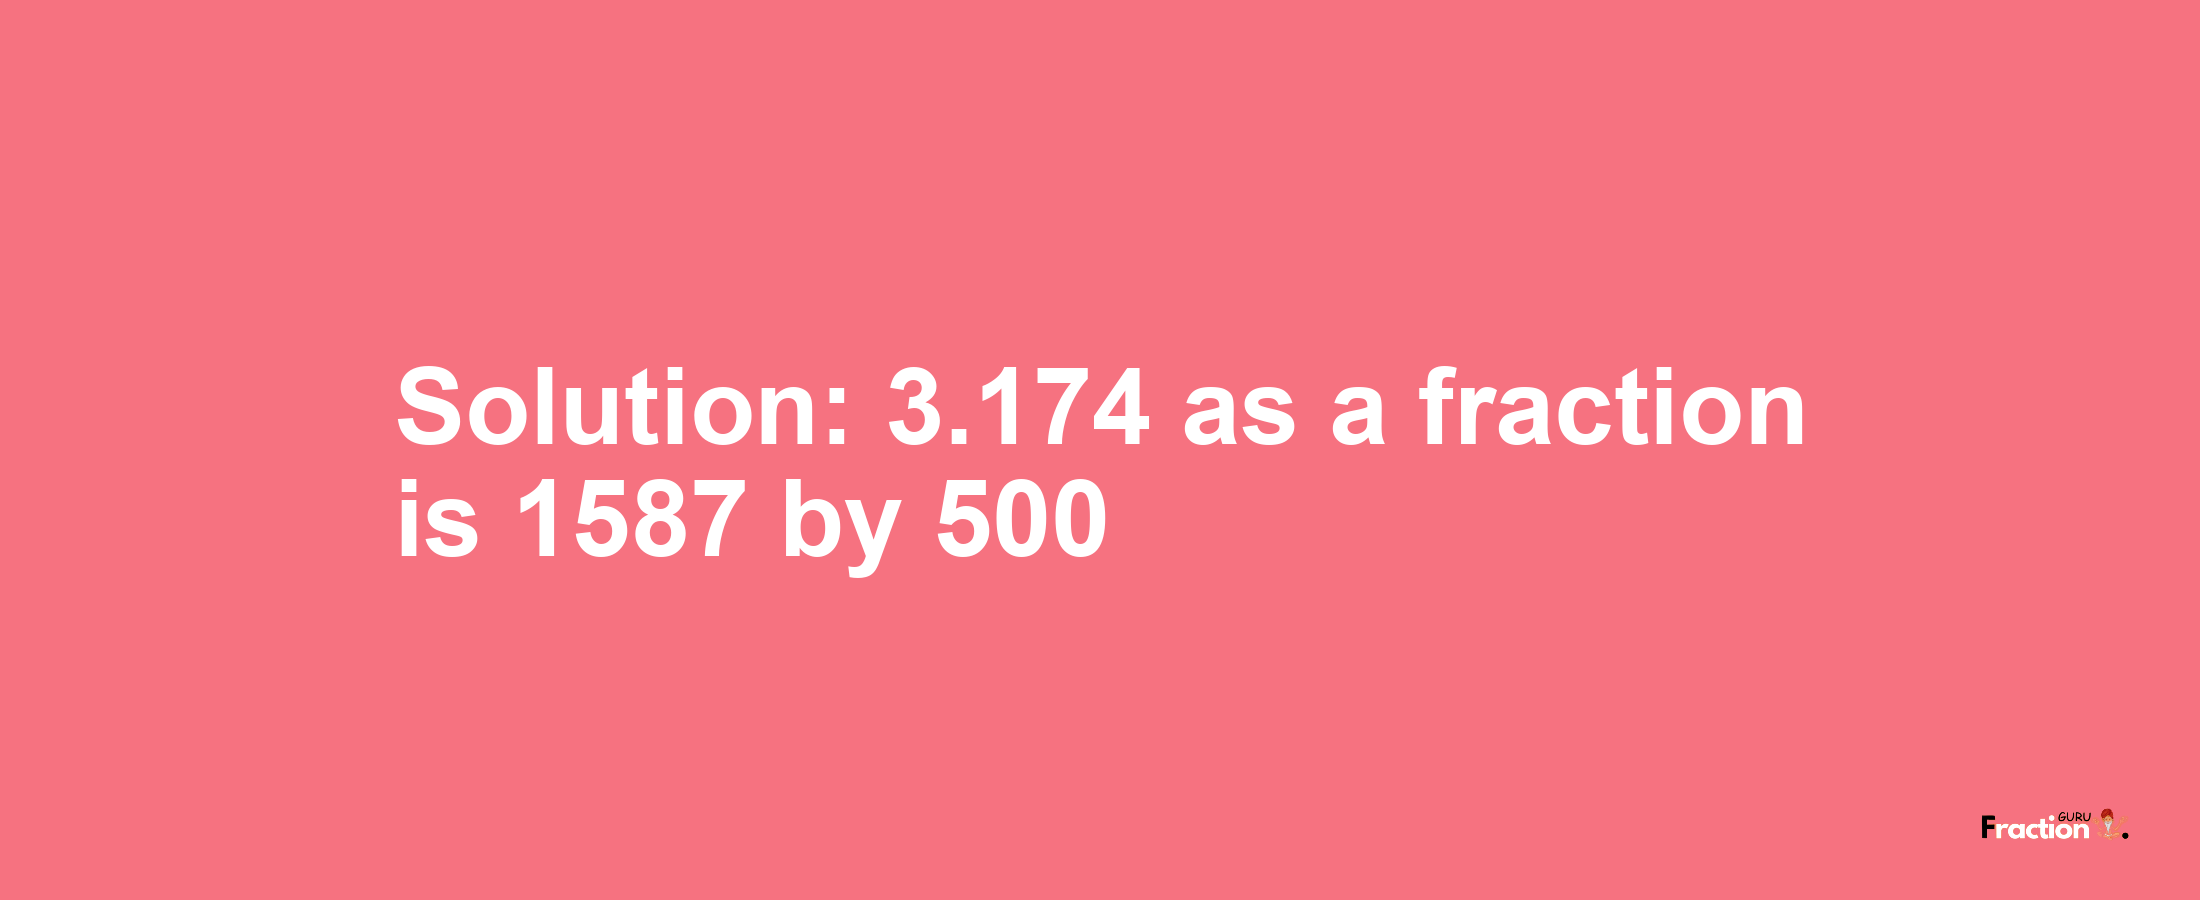 Solution:3.174 as a fraction is 1587/500